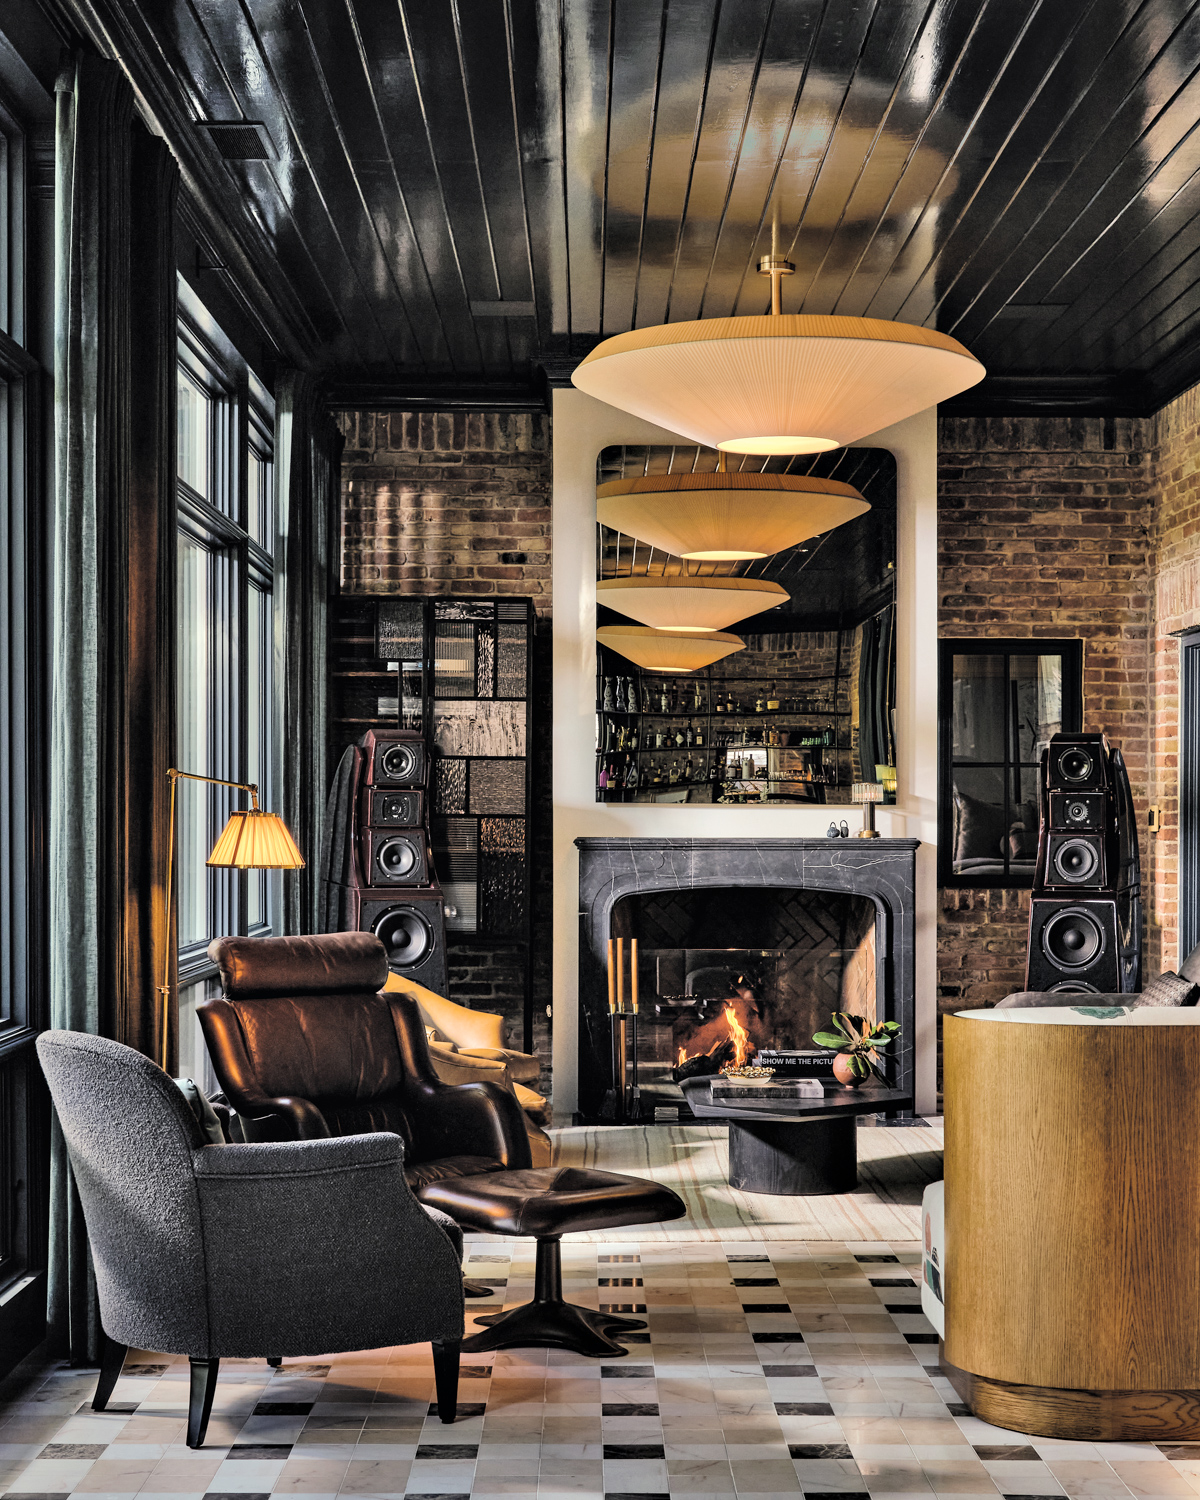 Large, stacked speakers flank fireplace in casual seating area with exposed brick chosen by Chad Dorsey Design